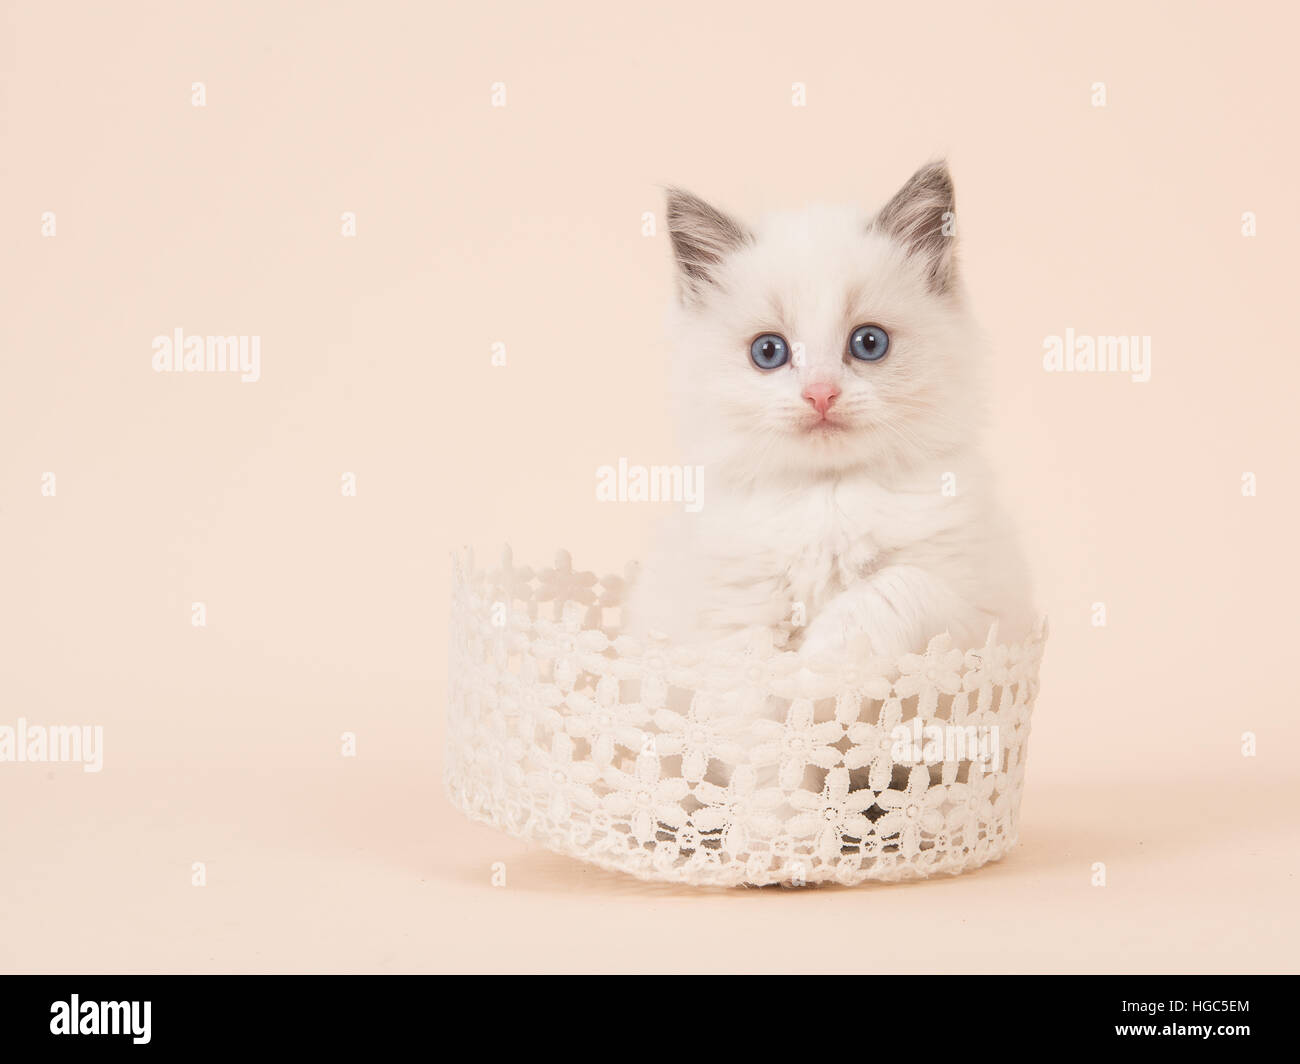 Cute baby rag doll longhair baby cat with blue eyes in a white lace basket on a creme soft white background Stock Photo